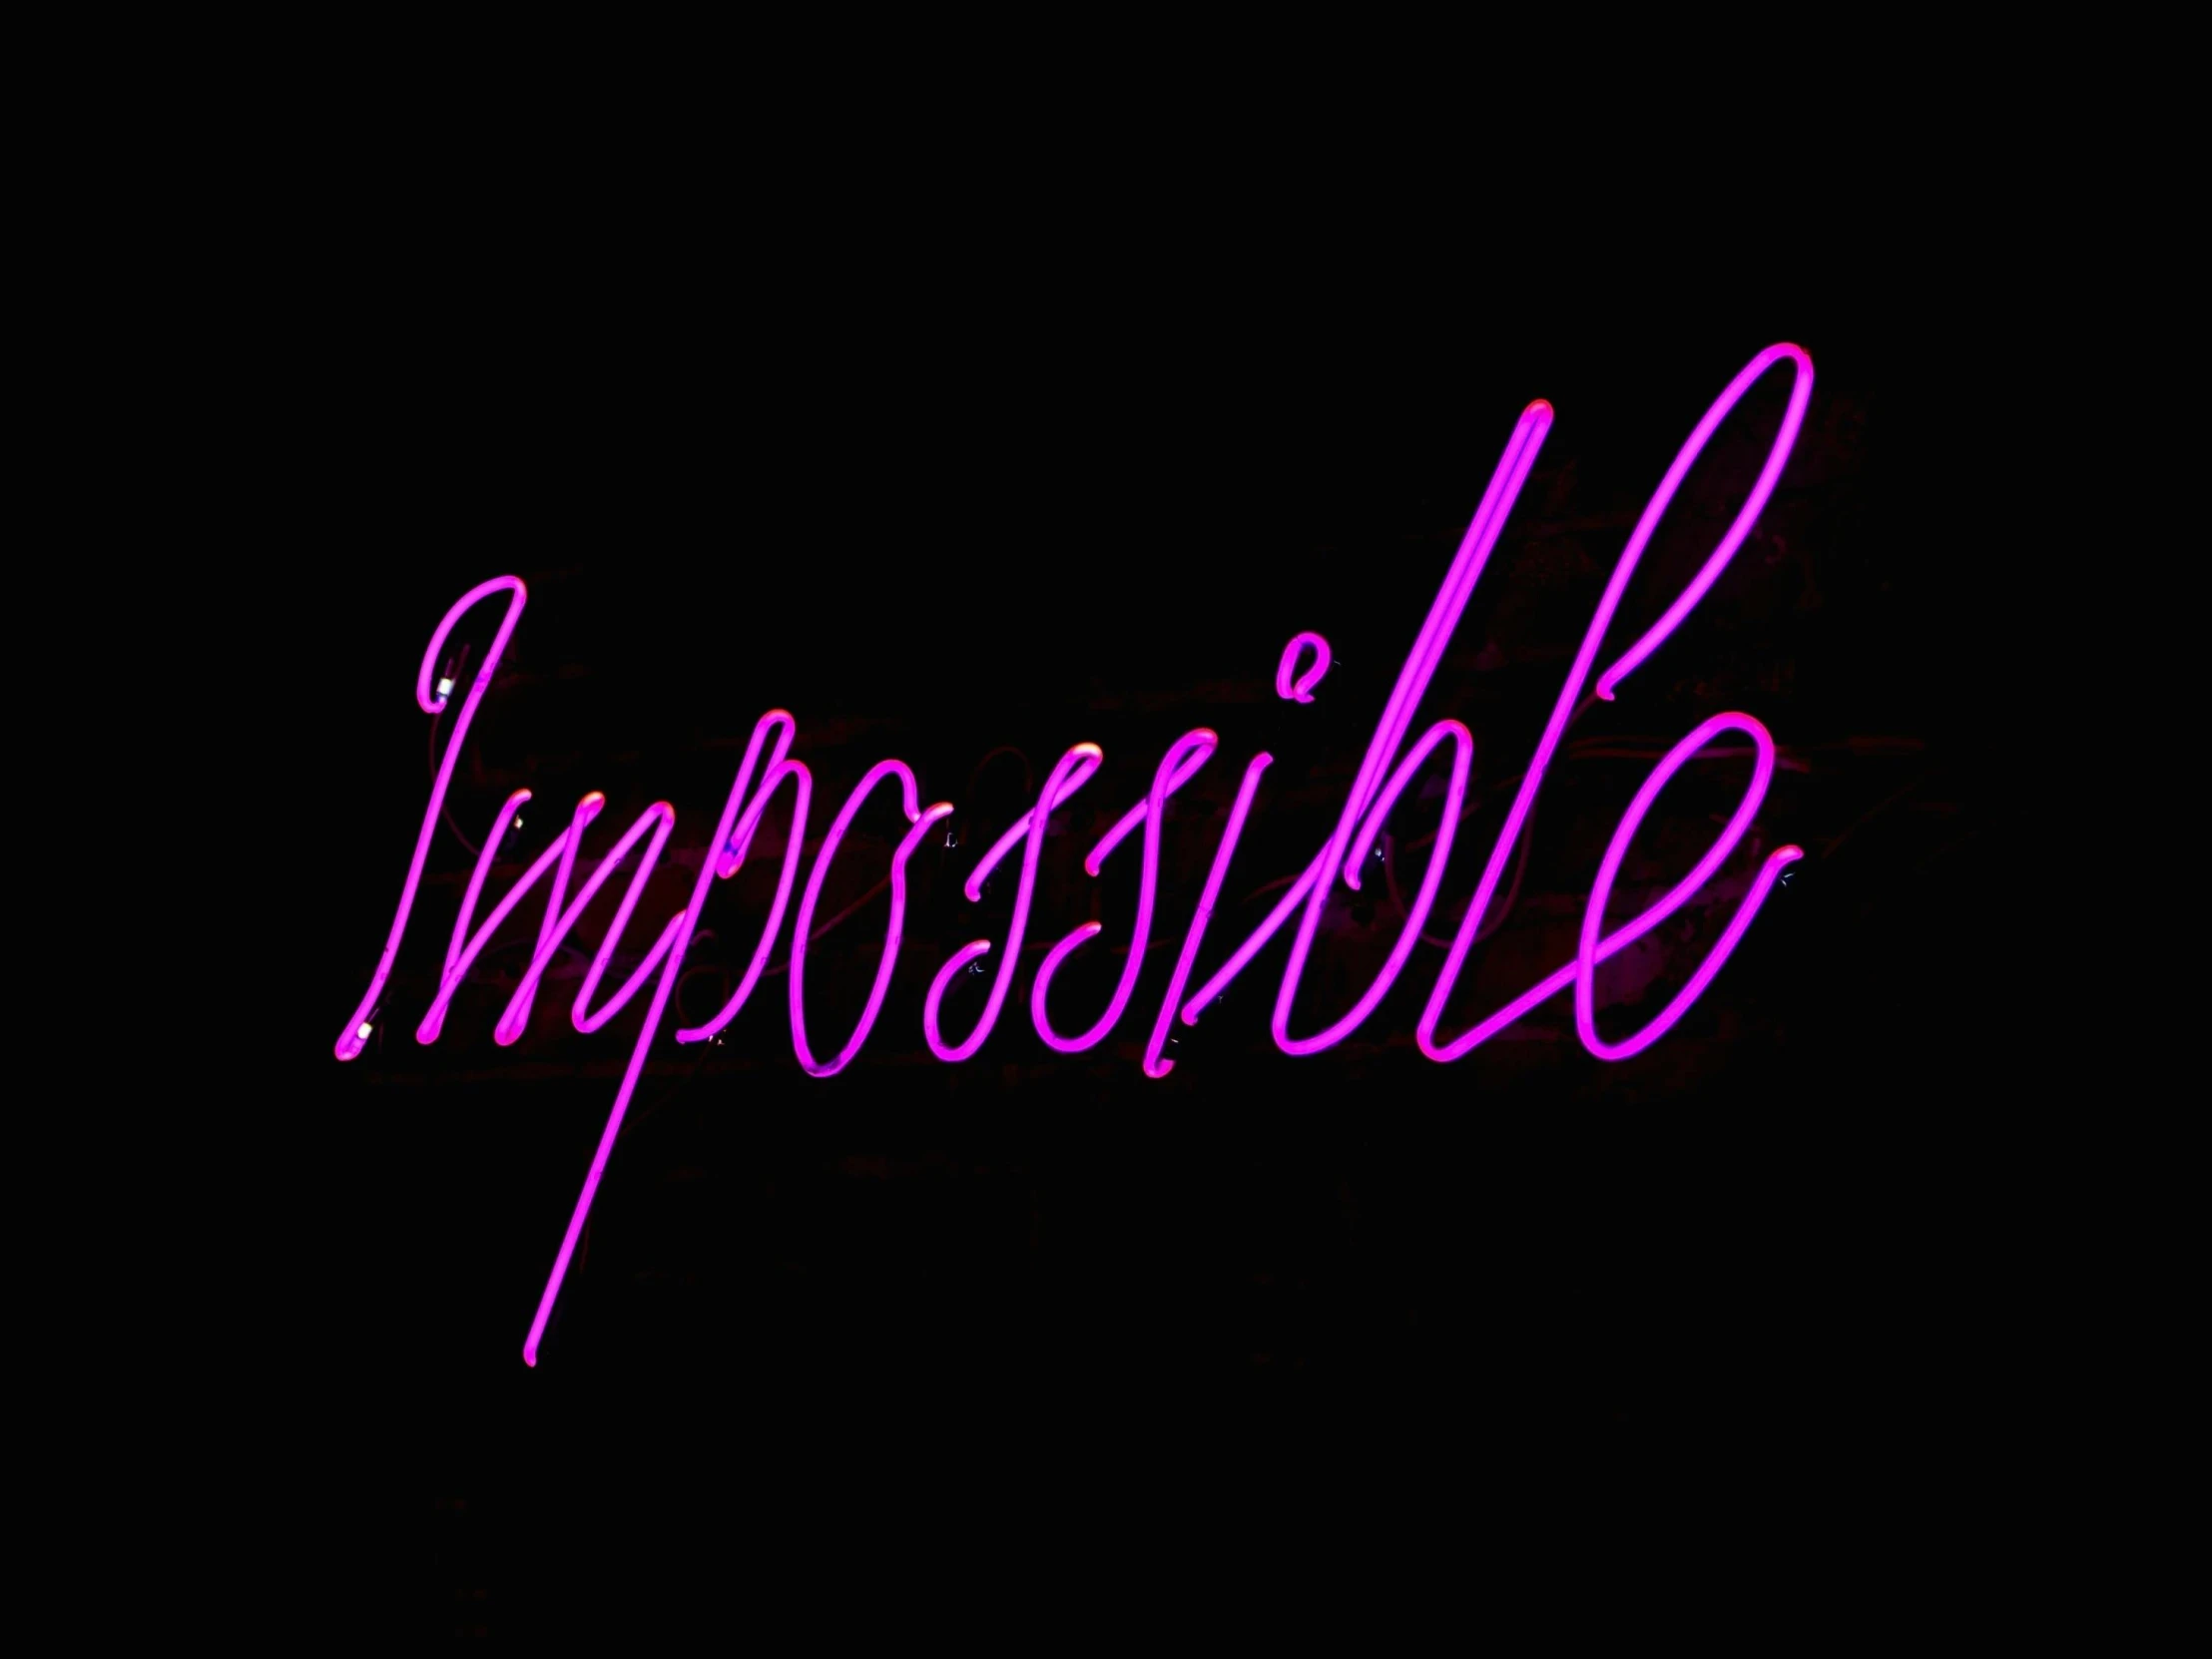 the word impossible on a black background, an album cover, inspired by David LaChapelle, soft neon purple lighting, 👰 🏇 ❌ 🍃, kim possible, pink neon lights